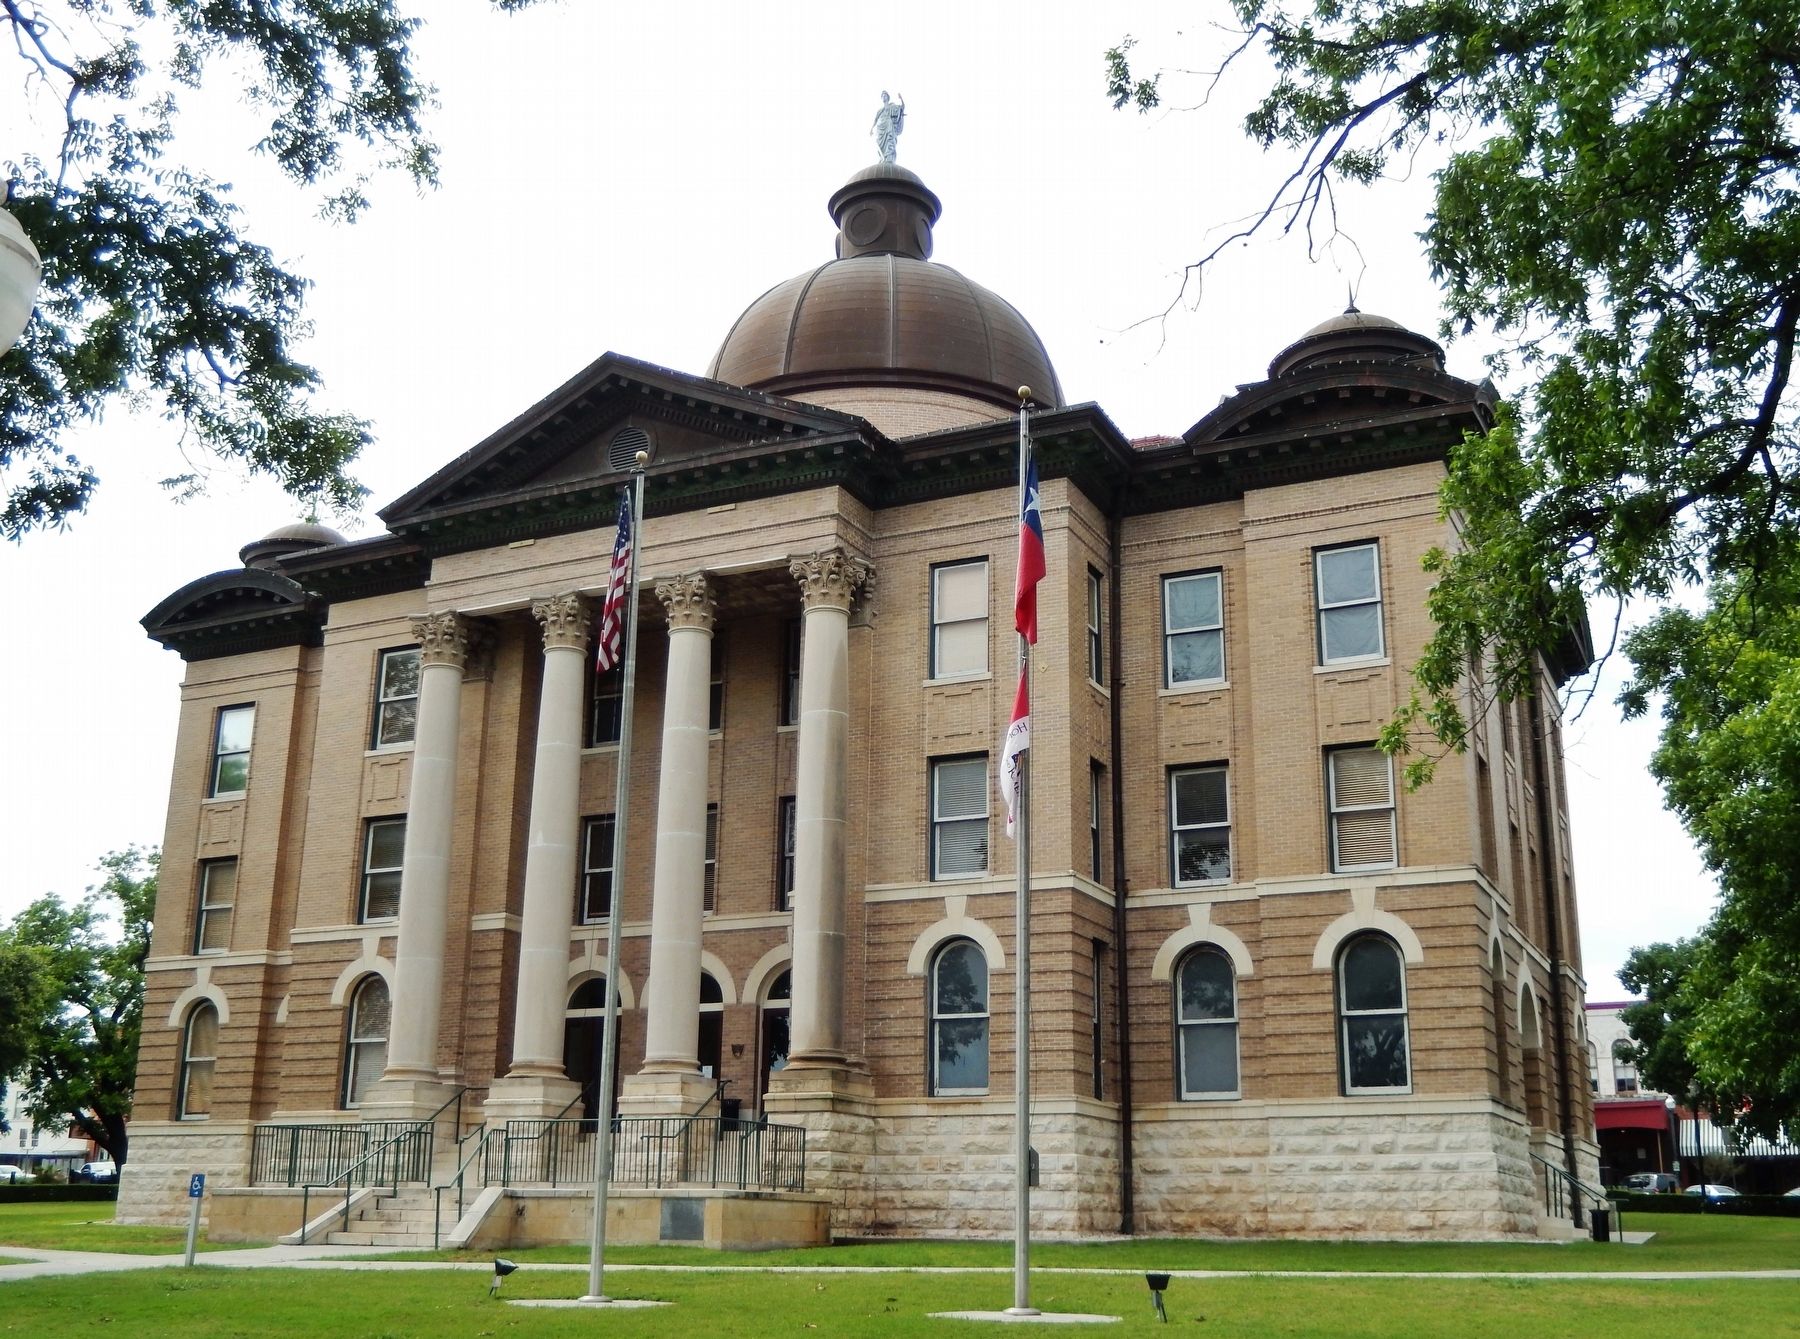 Hays County Courthouse (<i>front view</i>) image. Click for full size.